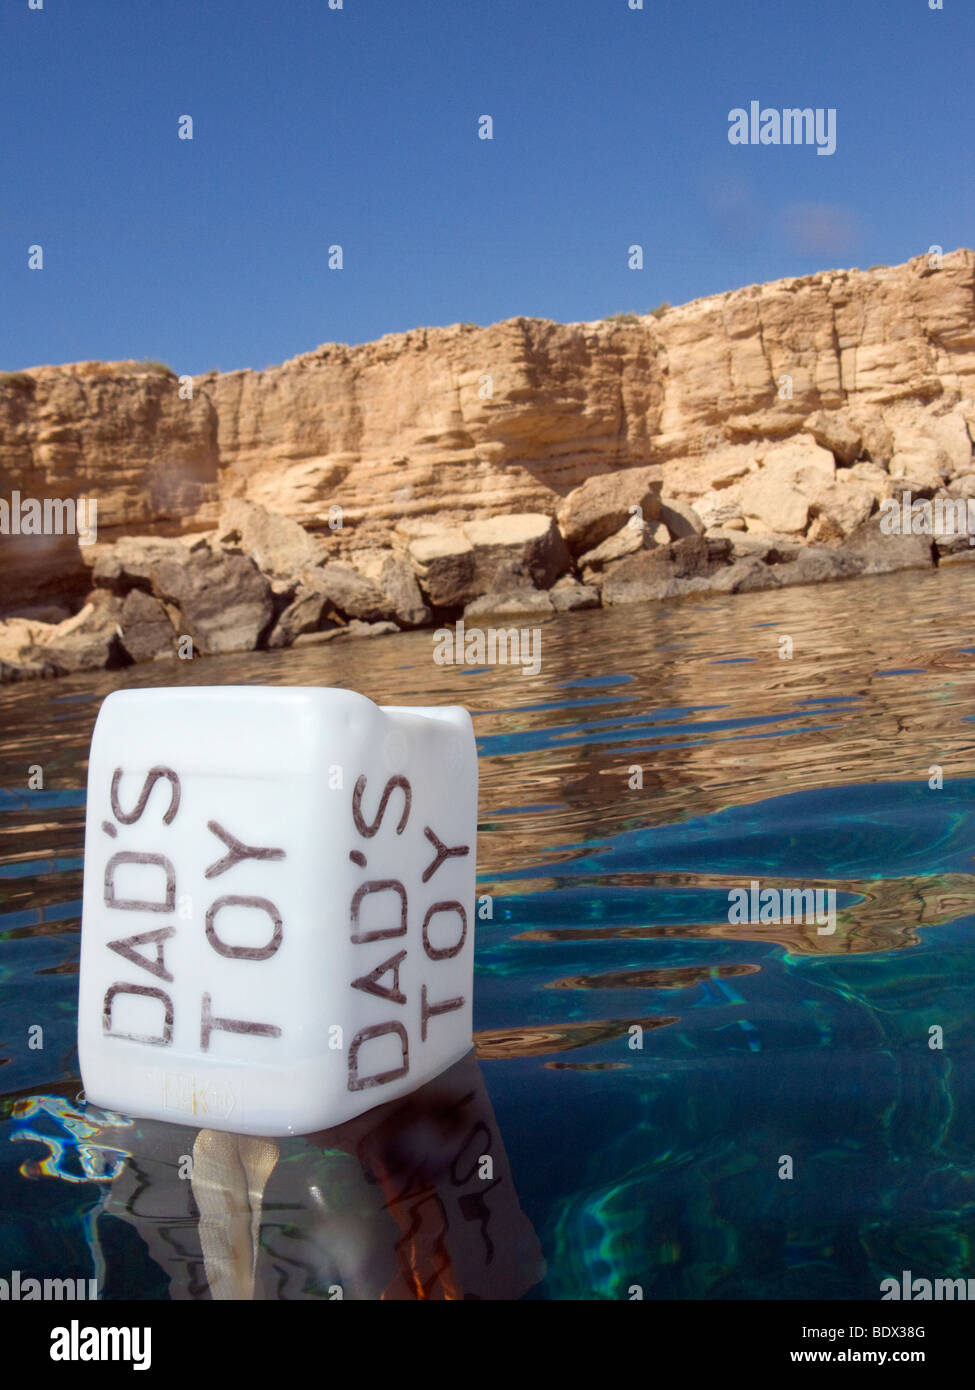 A buoy with the Text: DAD'S TOY. The buoy is situated in the Blue Lagoon near Cape Greco, Cyprus. Stock Photo